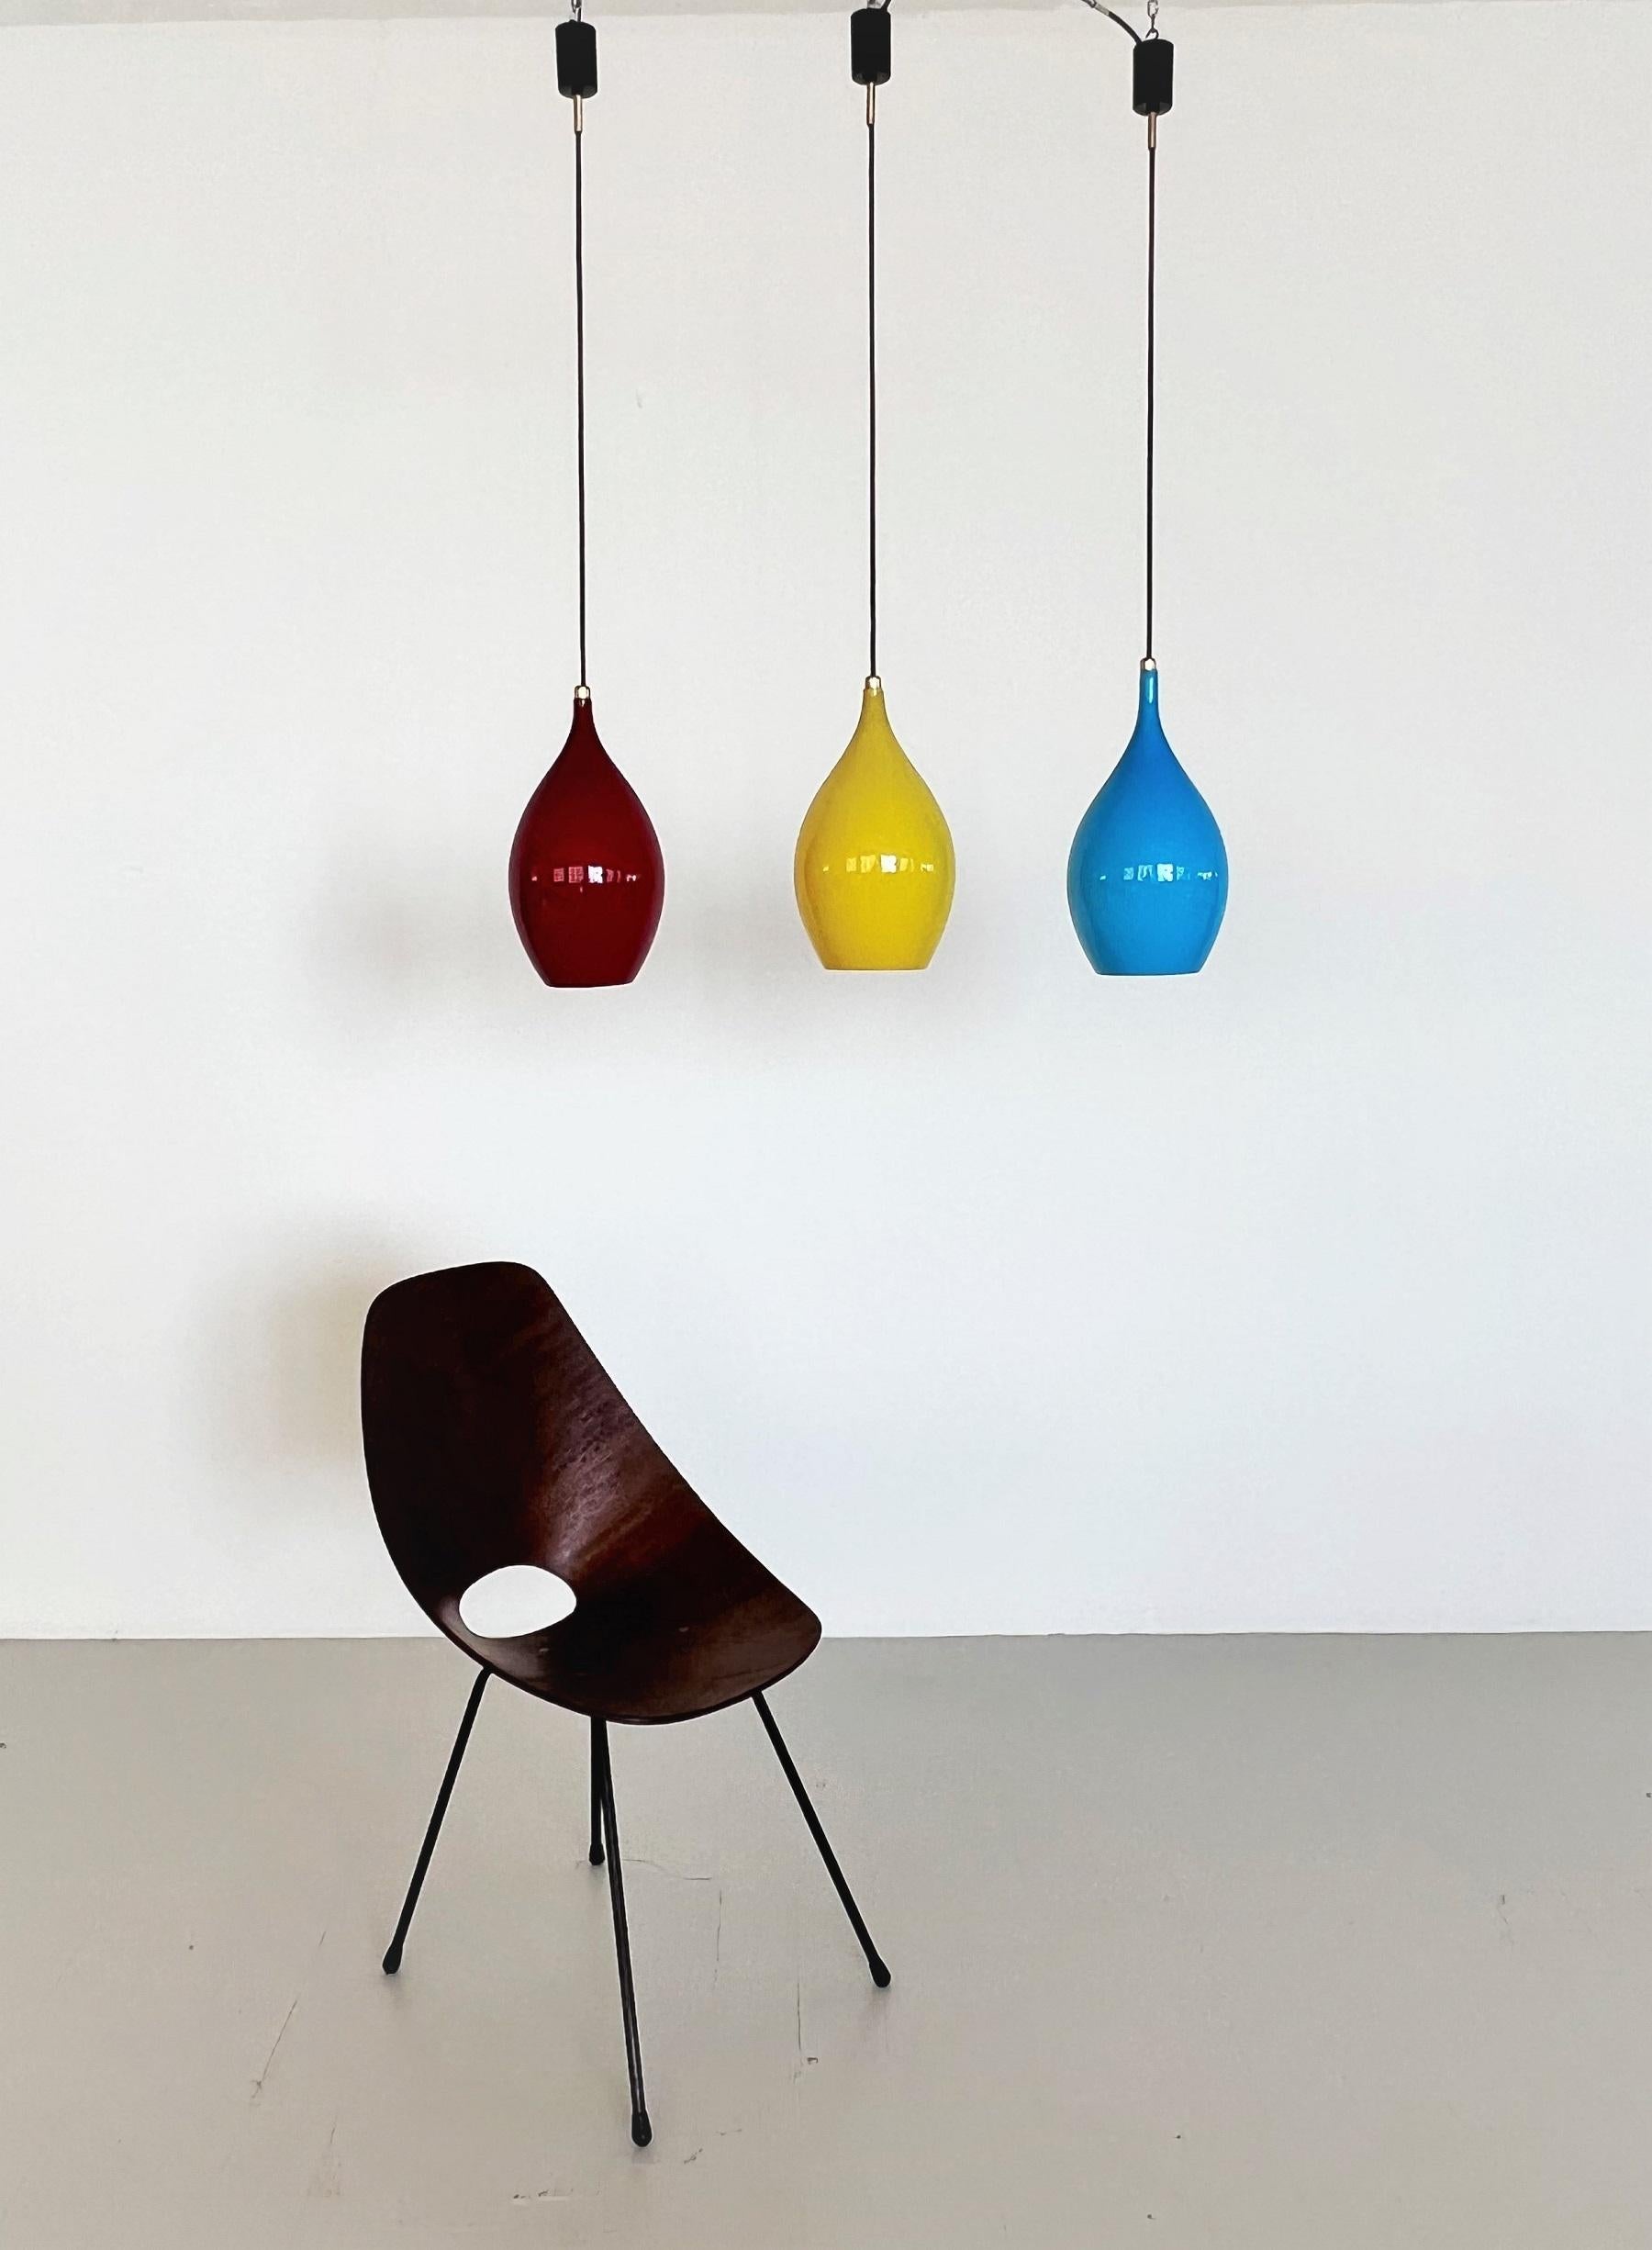 Beautiful pair of three glass pendant lights in different, shiny colors: red, blue and yellow.
Made in Murano, Italy in the midcentury of the 1960s - 1970s, typically in the style of Vistosi. 
All three lamps are in great shape and condition, and